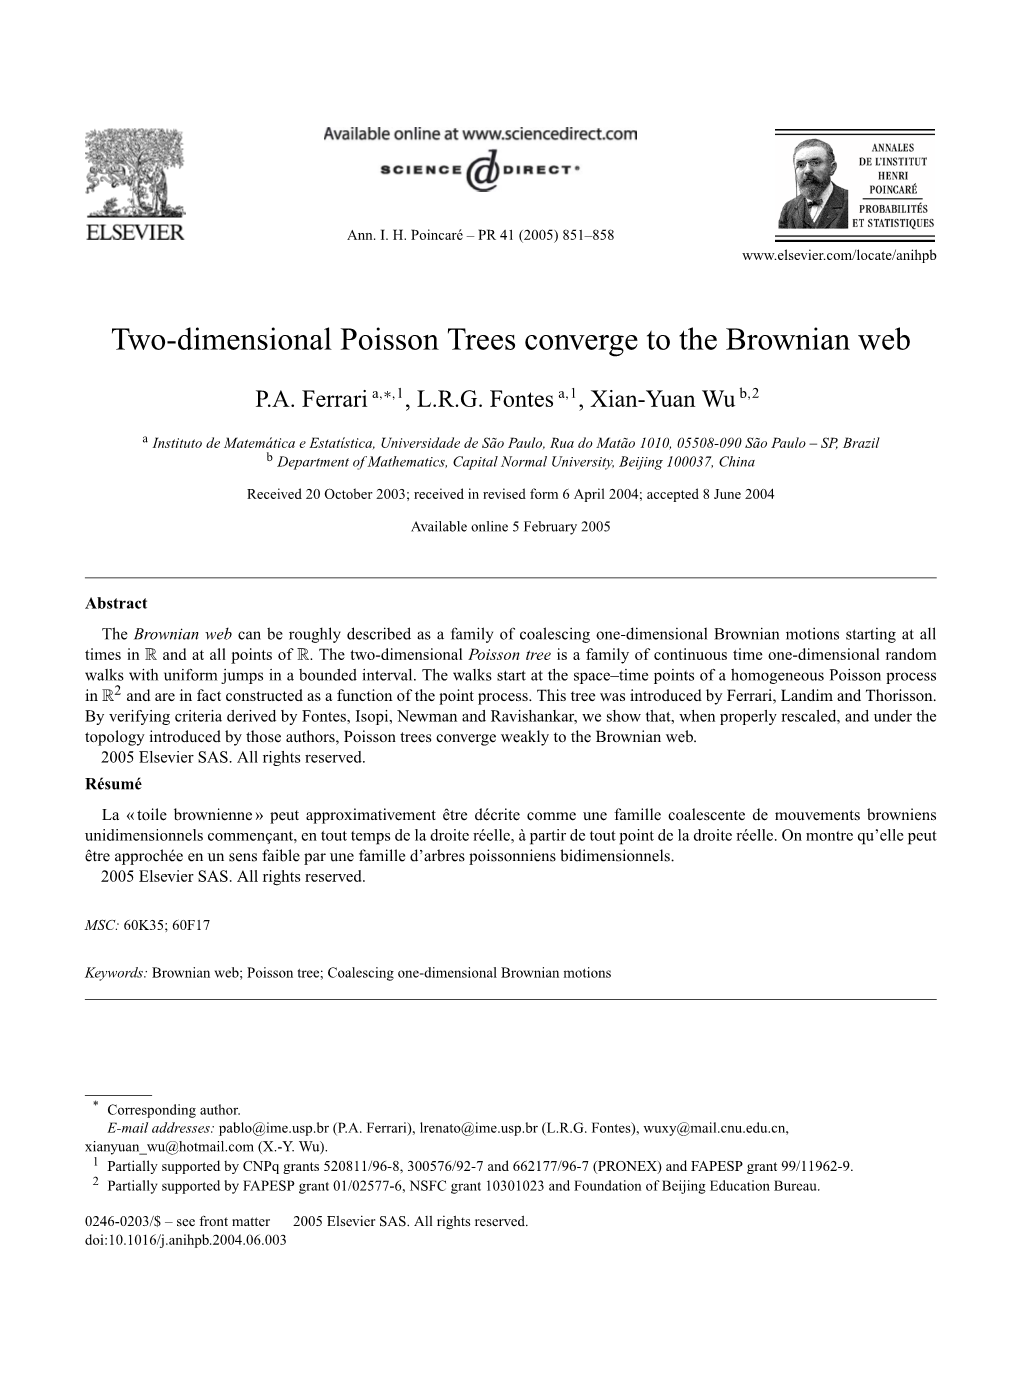 Two-Dimensional Poisson Trees Converge to the Brownian Web